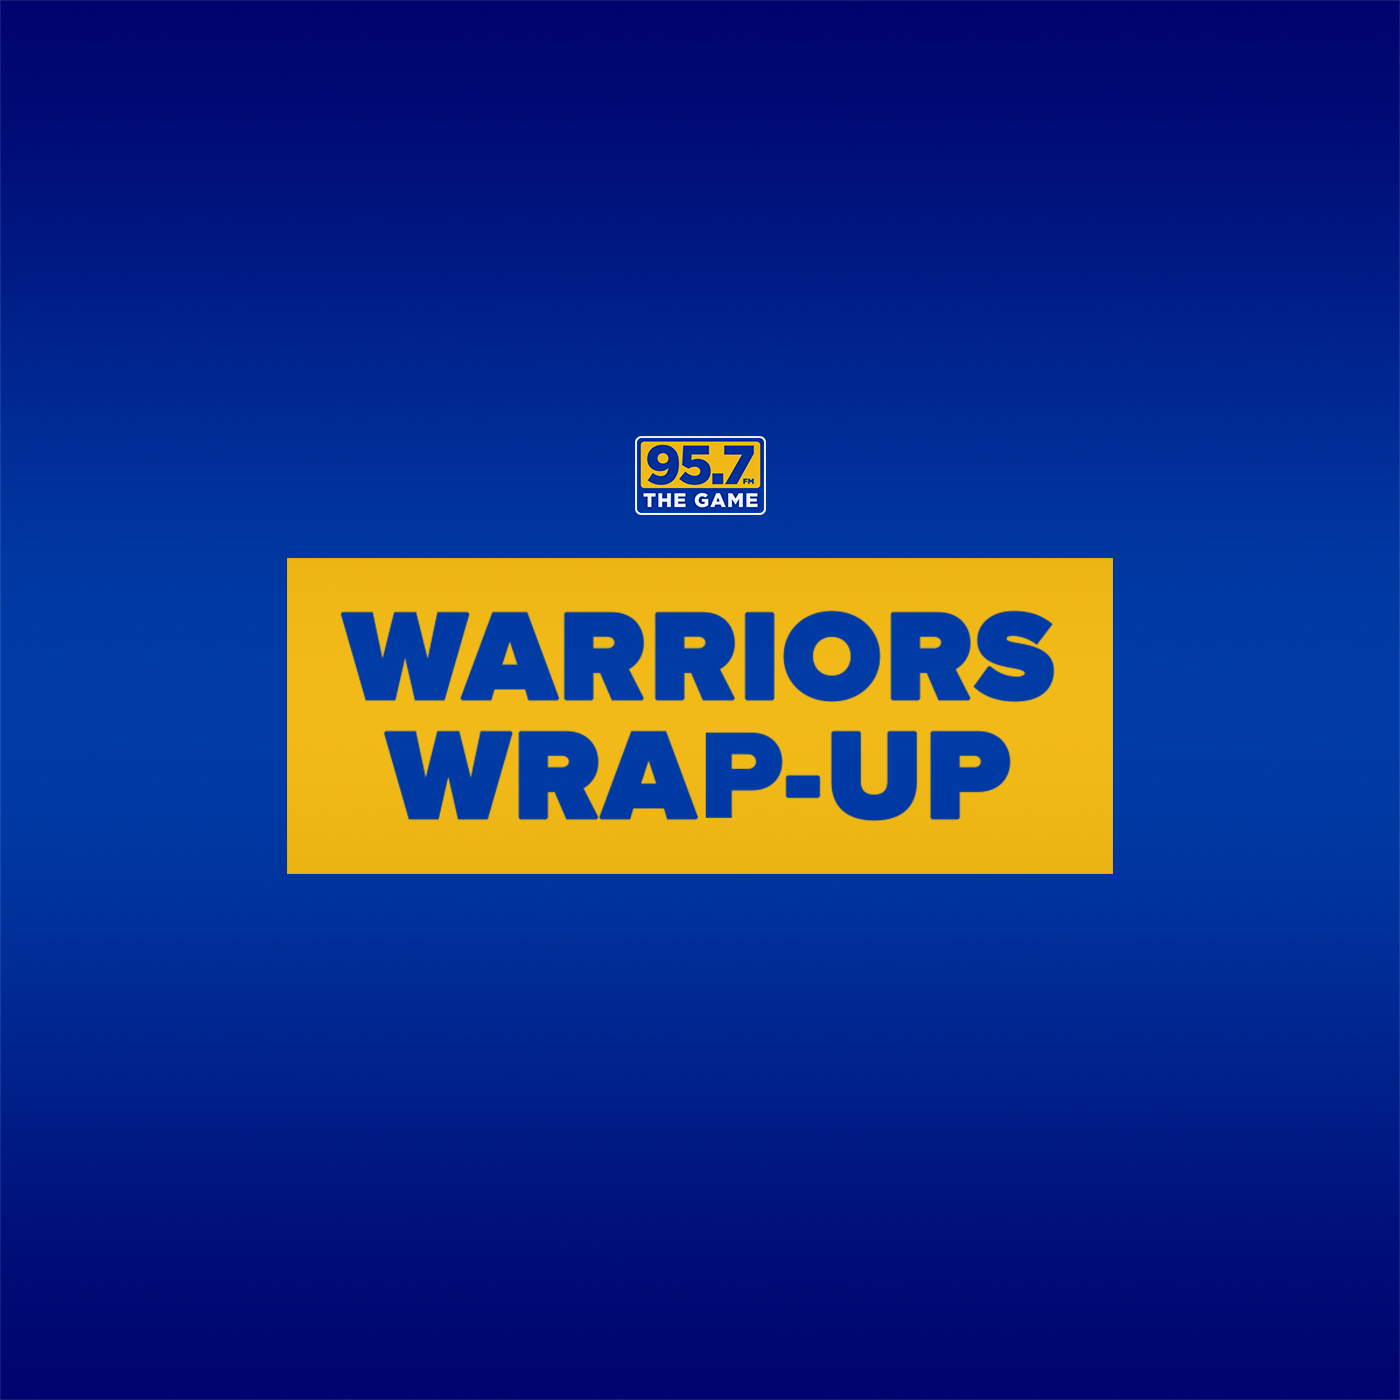 Dubs drop the 6th of their last 8 games vs. T-Wolves